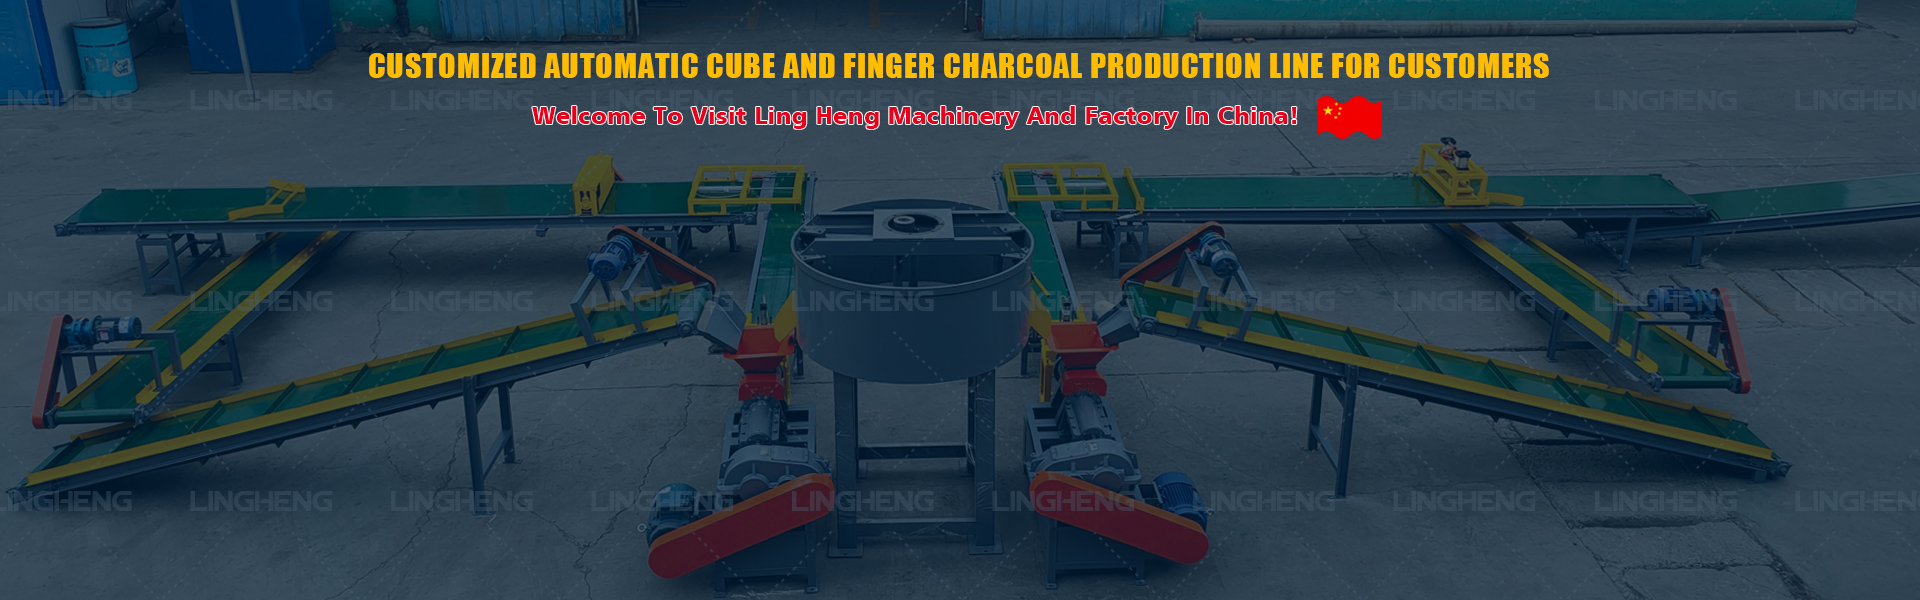 Customized Automatic Cube and Finger Charcoal Production Line